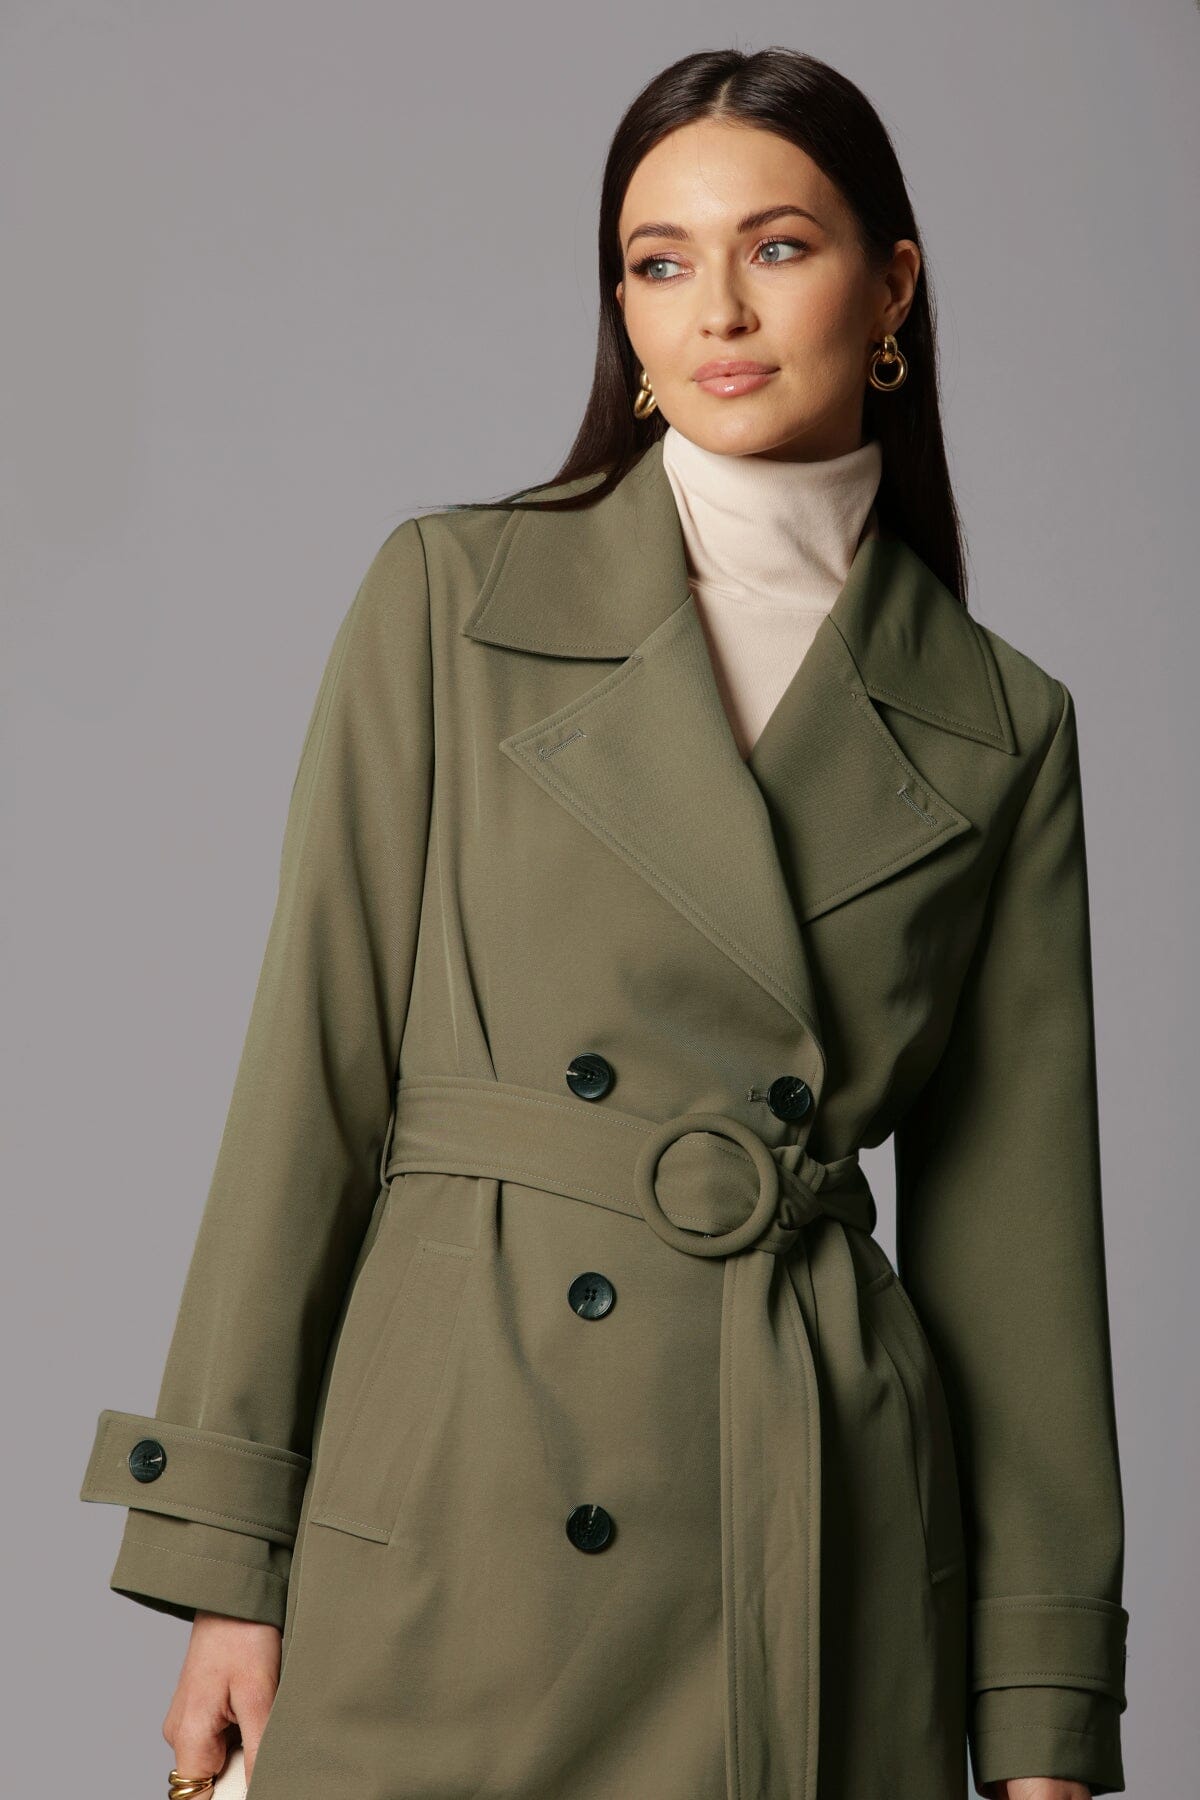 double breasted relaxed stretch crepe duster trench coat olive green outerwear - figure flattering designer fashion long fall coats for women